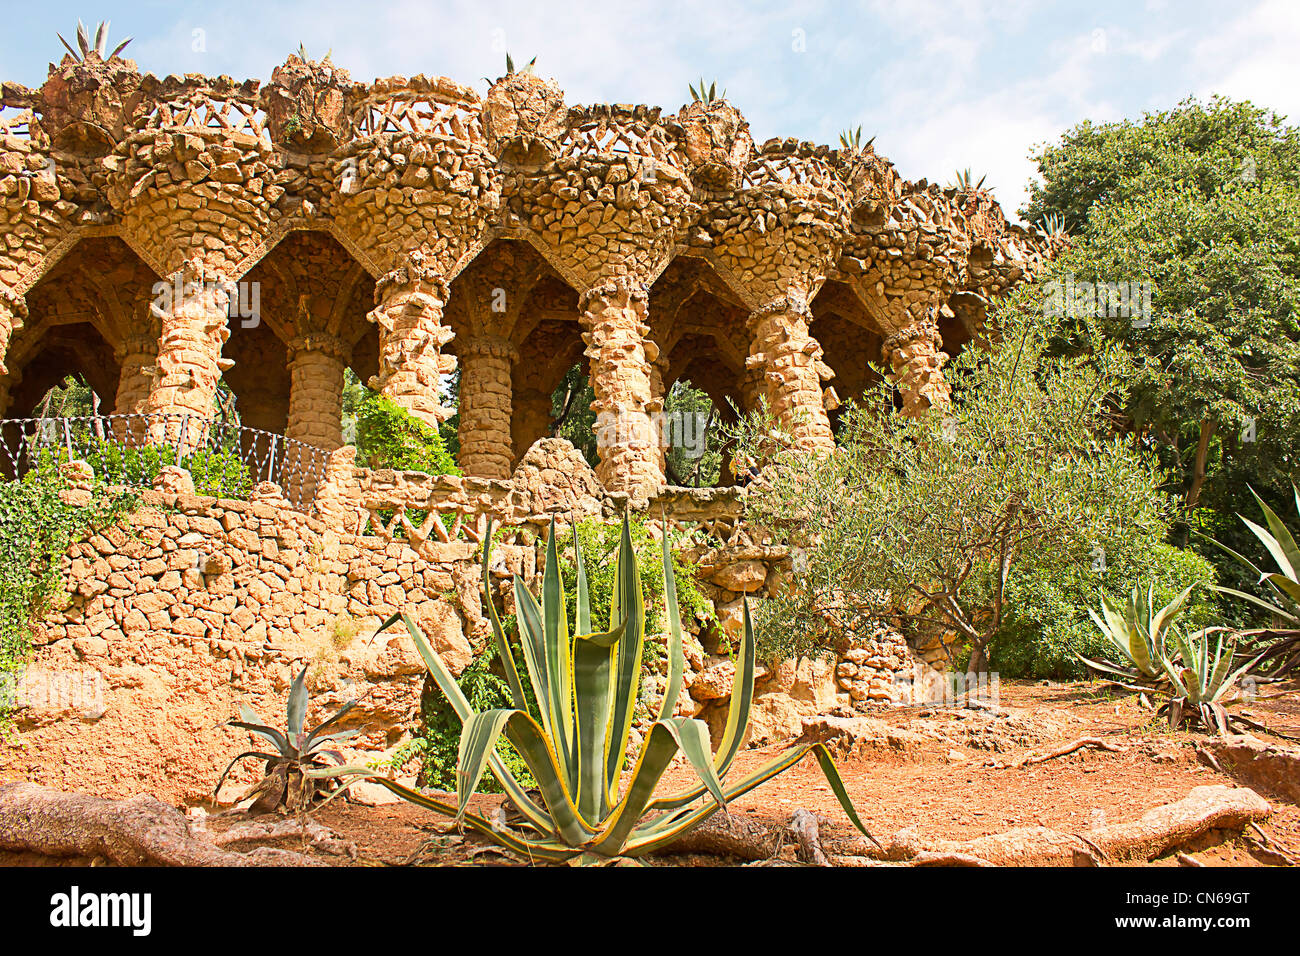 The famous park Guell in Barcelona, Spain Stock Photo